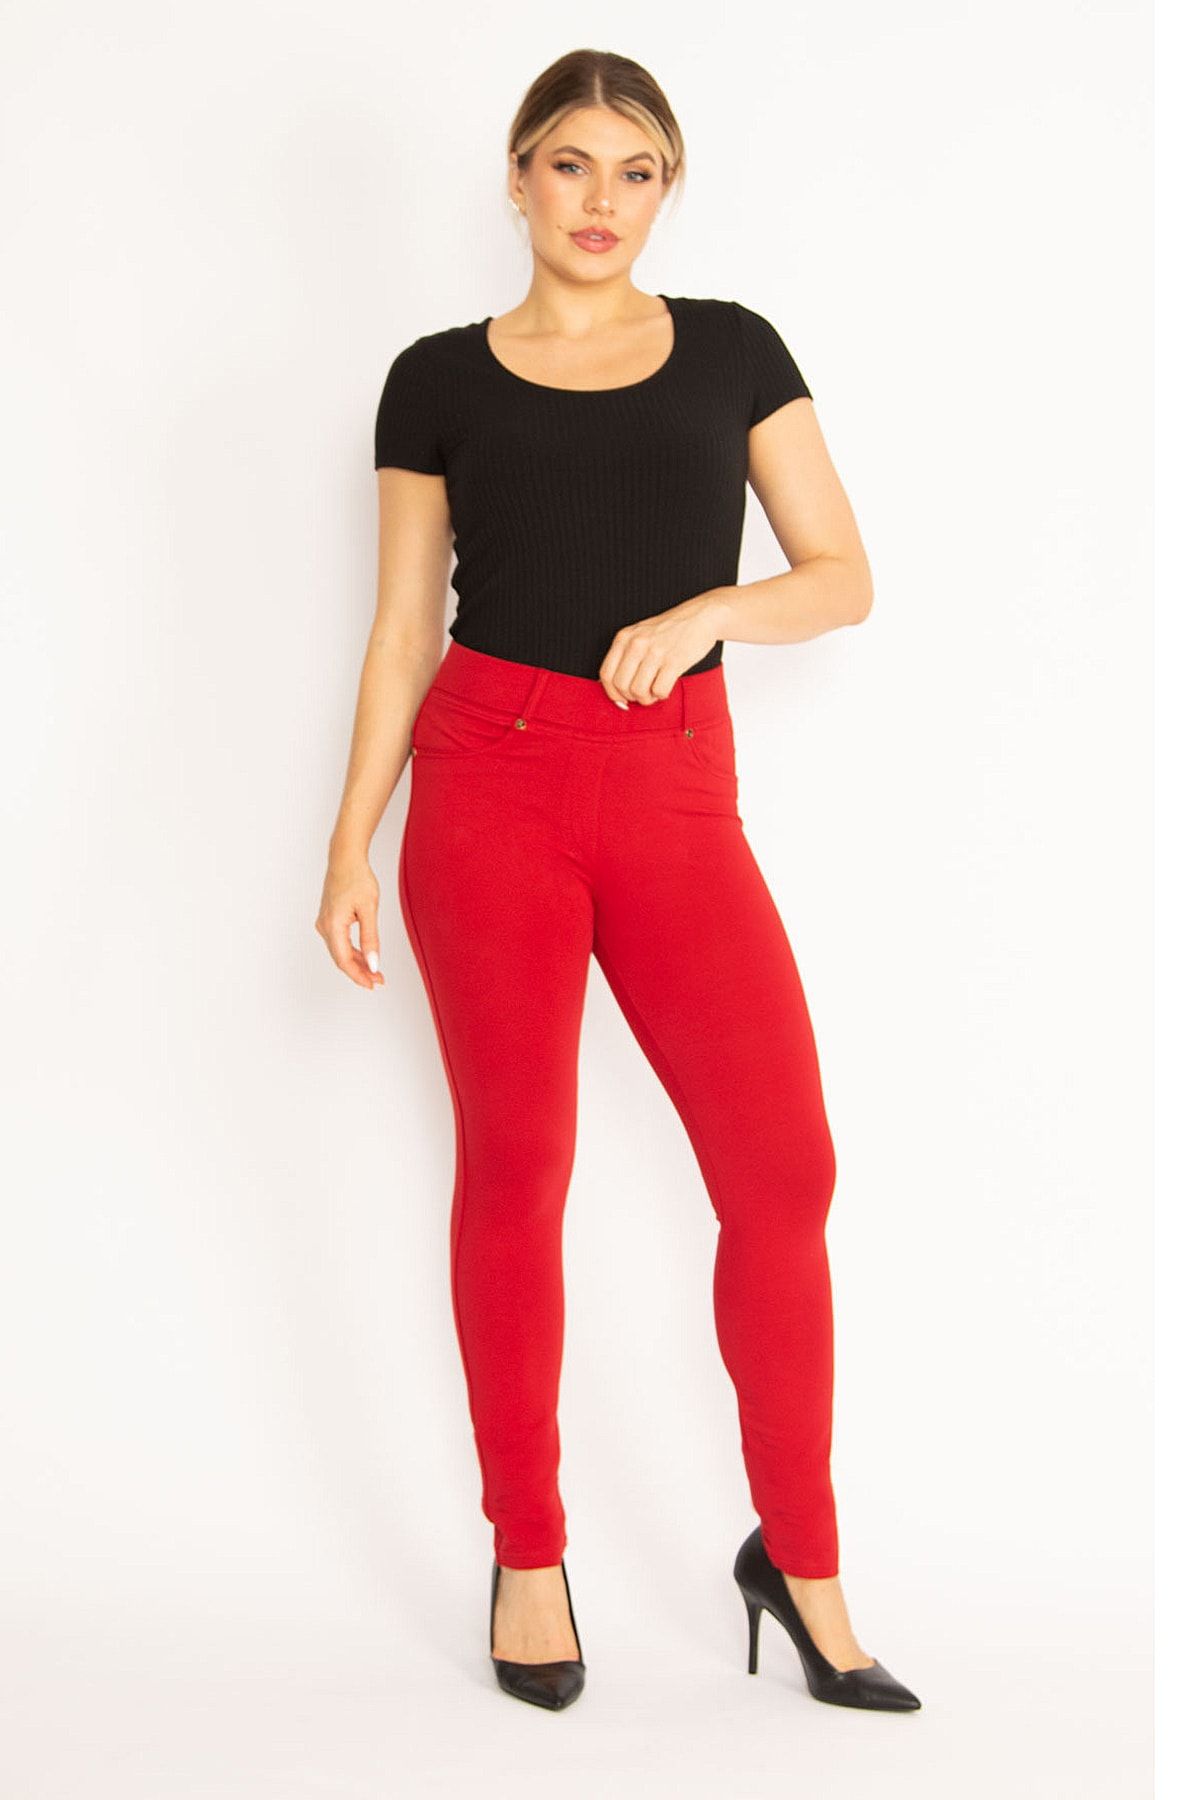 Şans Women's Large Size Red Leggings with Front Decoration and Back Pockets  65n34534 - Trendyol